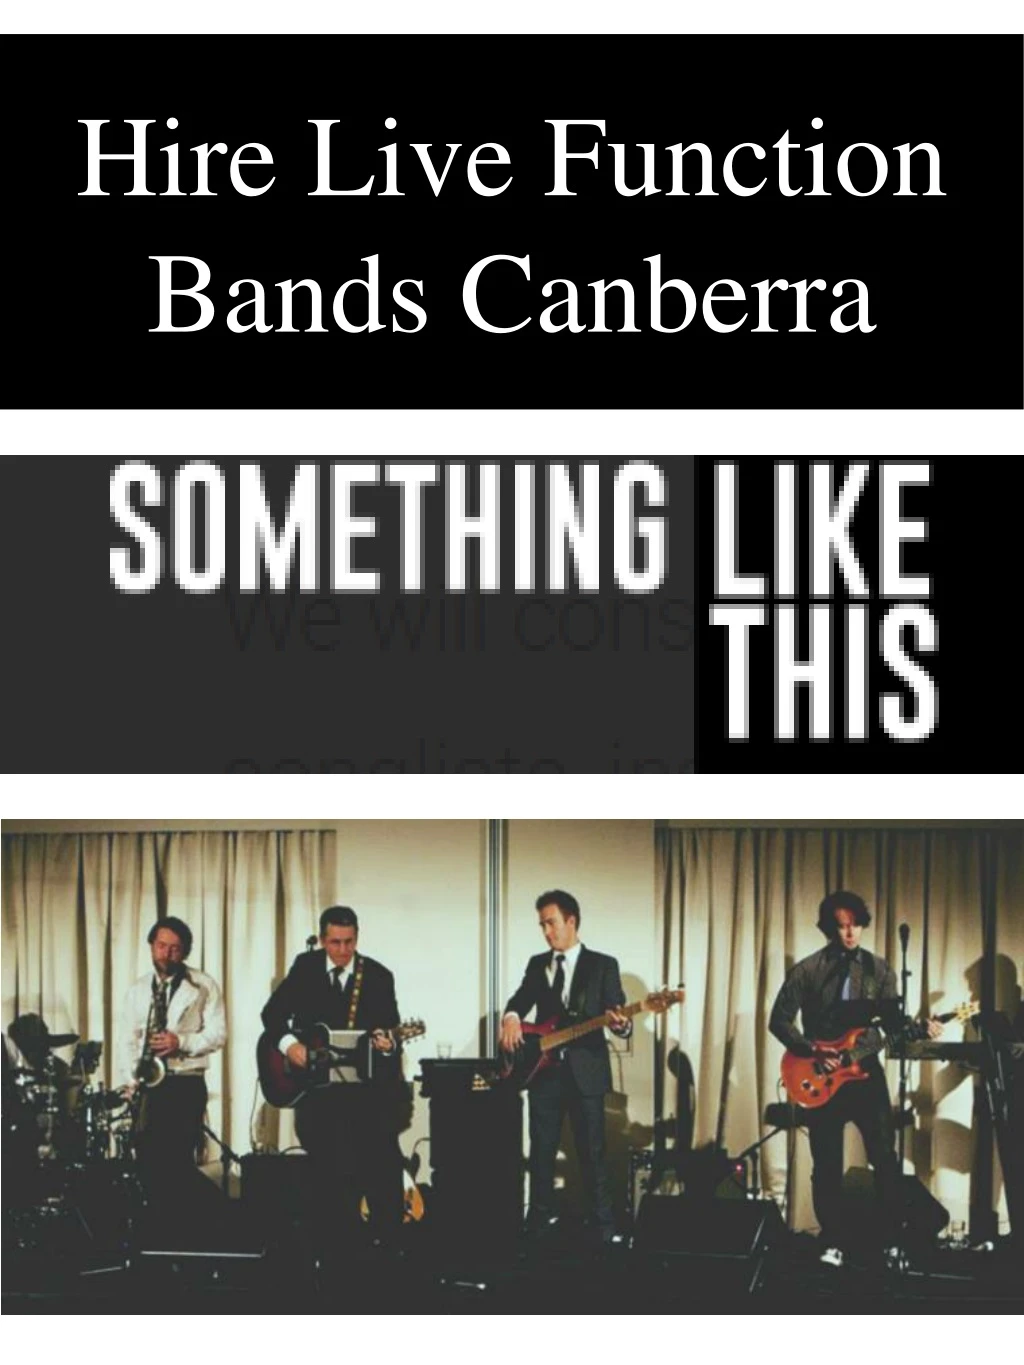 hire live function bands canberra